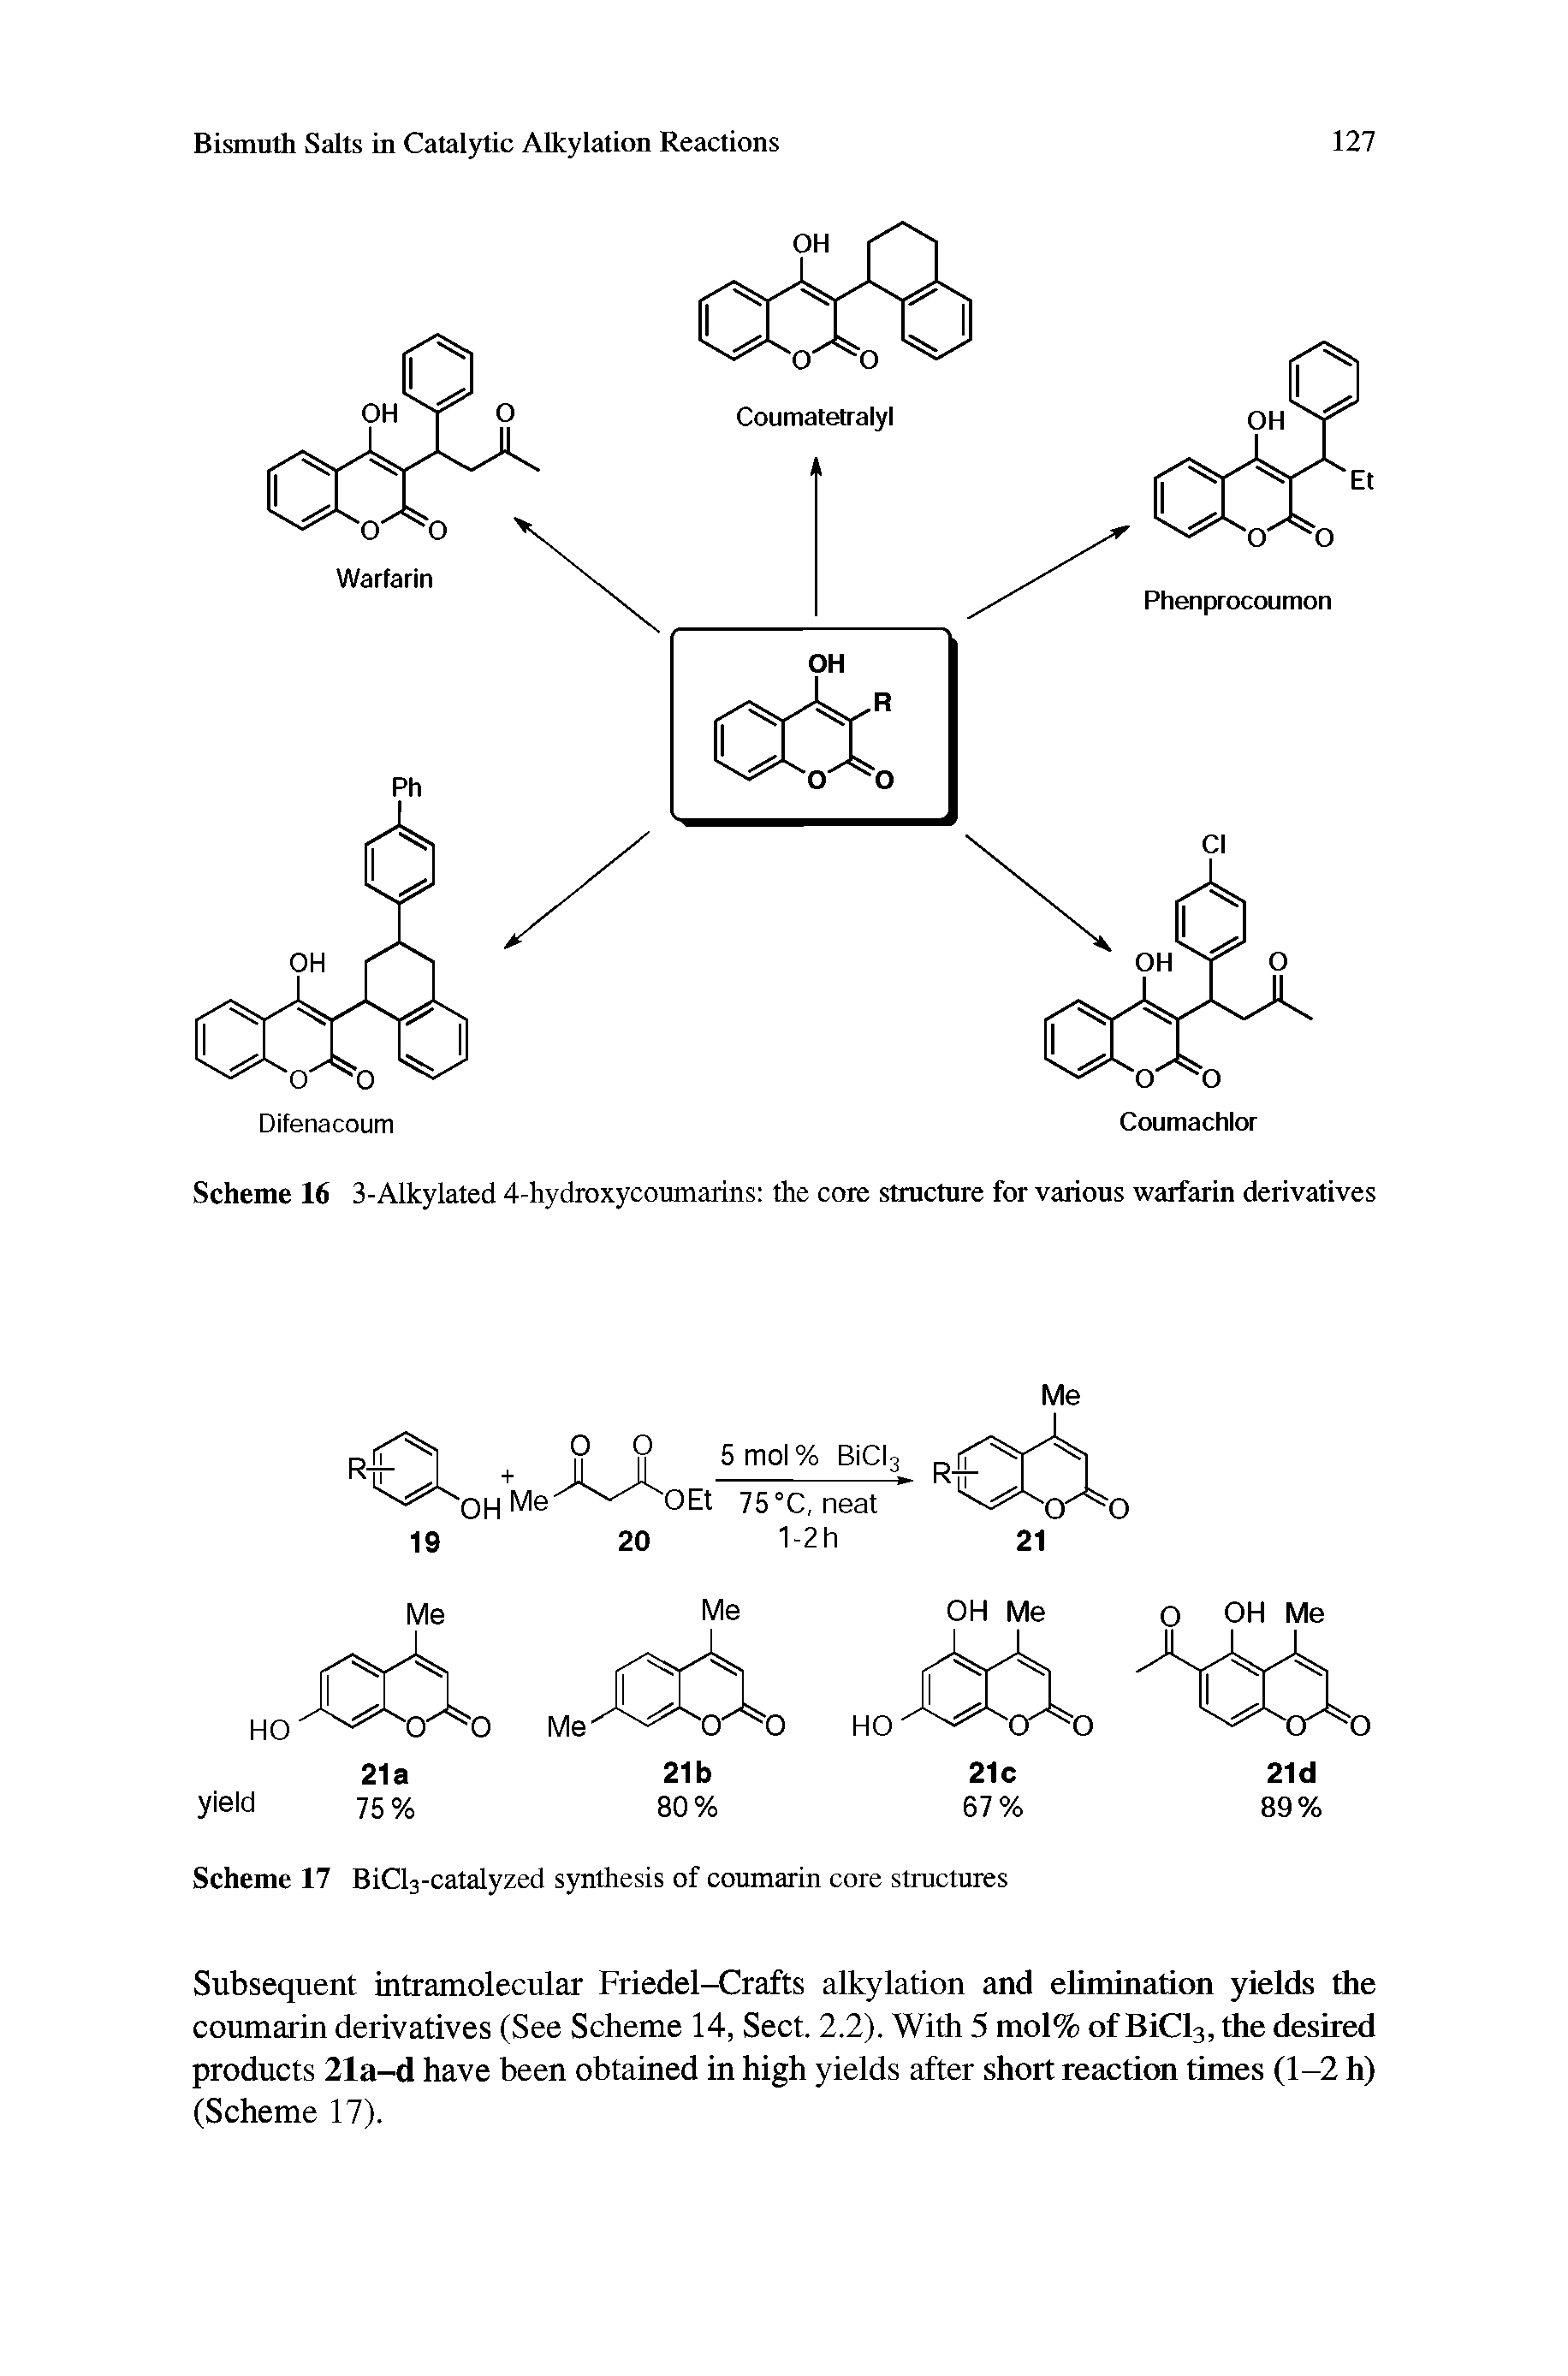 Scheme 16 3-Alkylated 4-hydroxycoumarins the core structure for various warfarin derivatives...